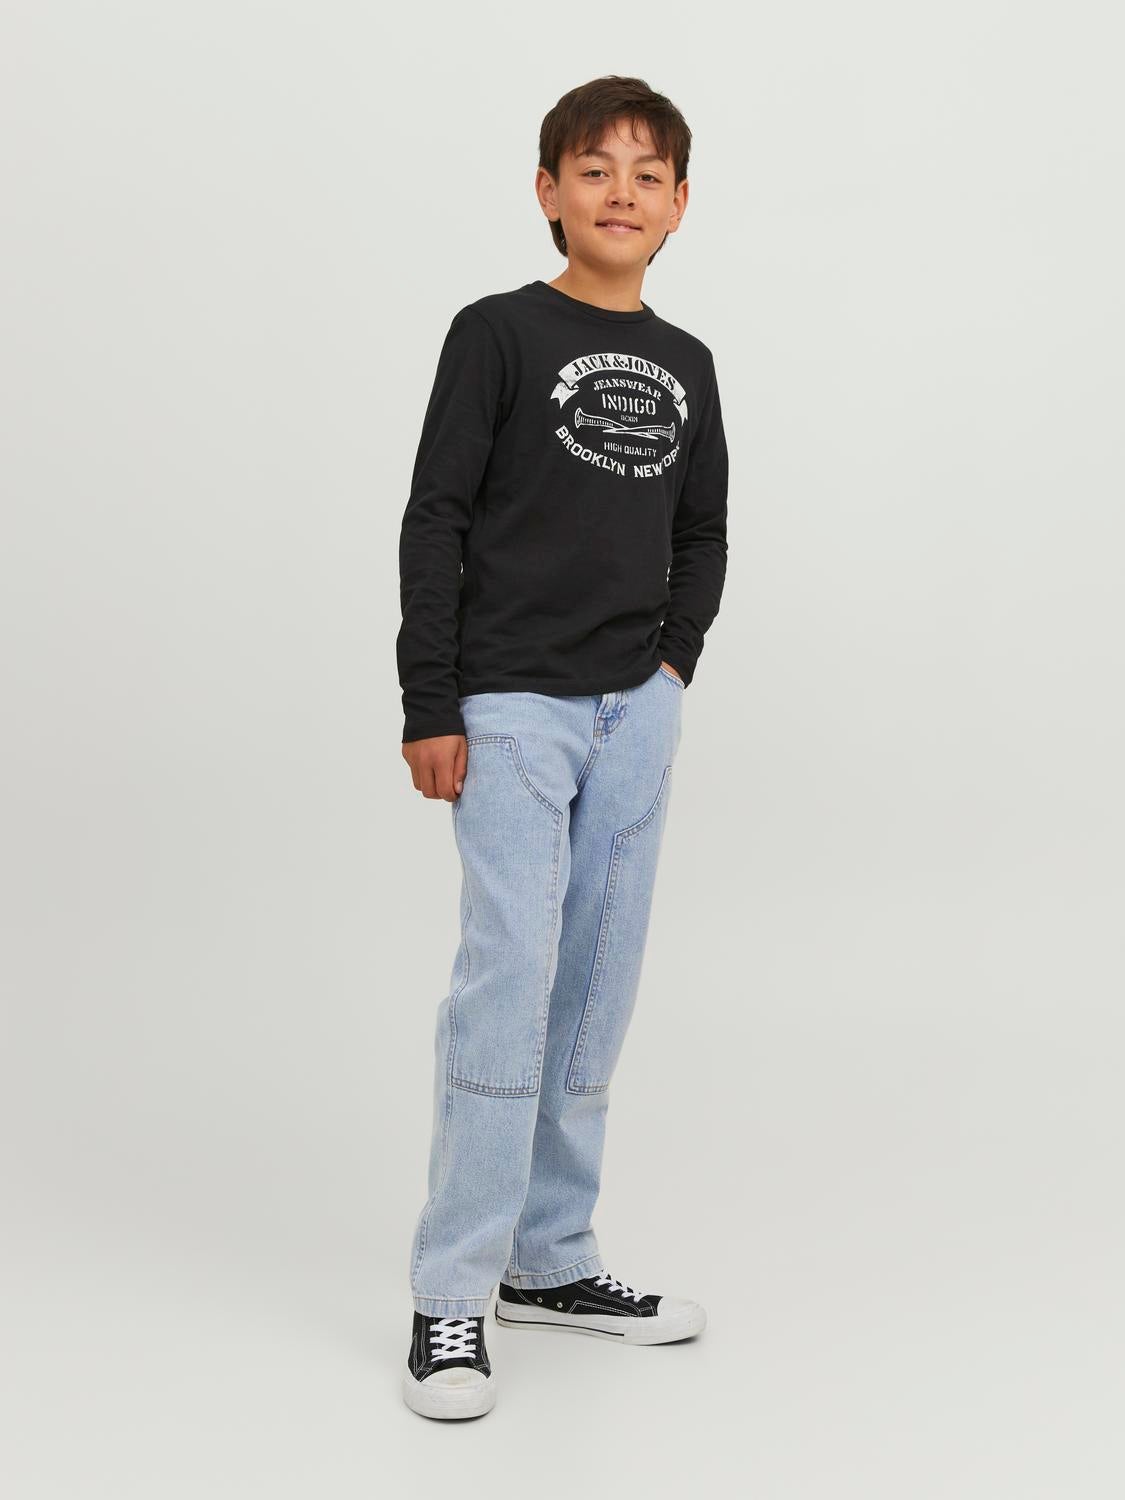 JJICHRIS JJCARPENTER MF 491 Relaxed Fit Jeans Para chicos